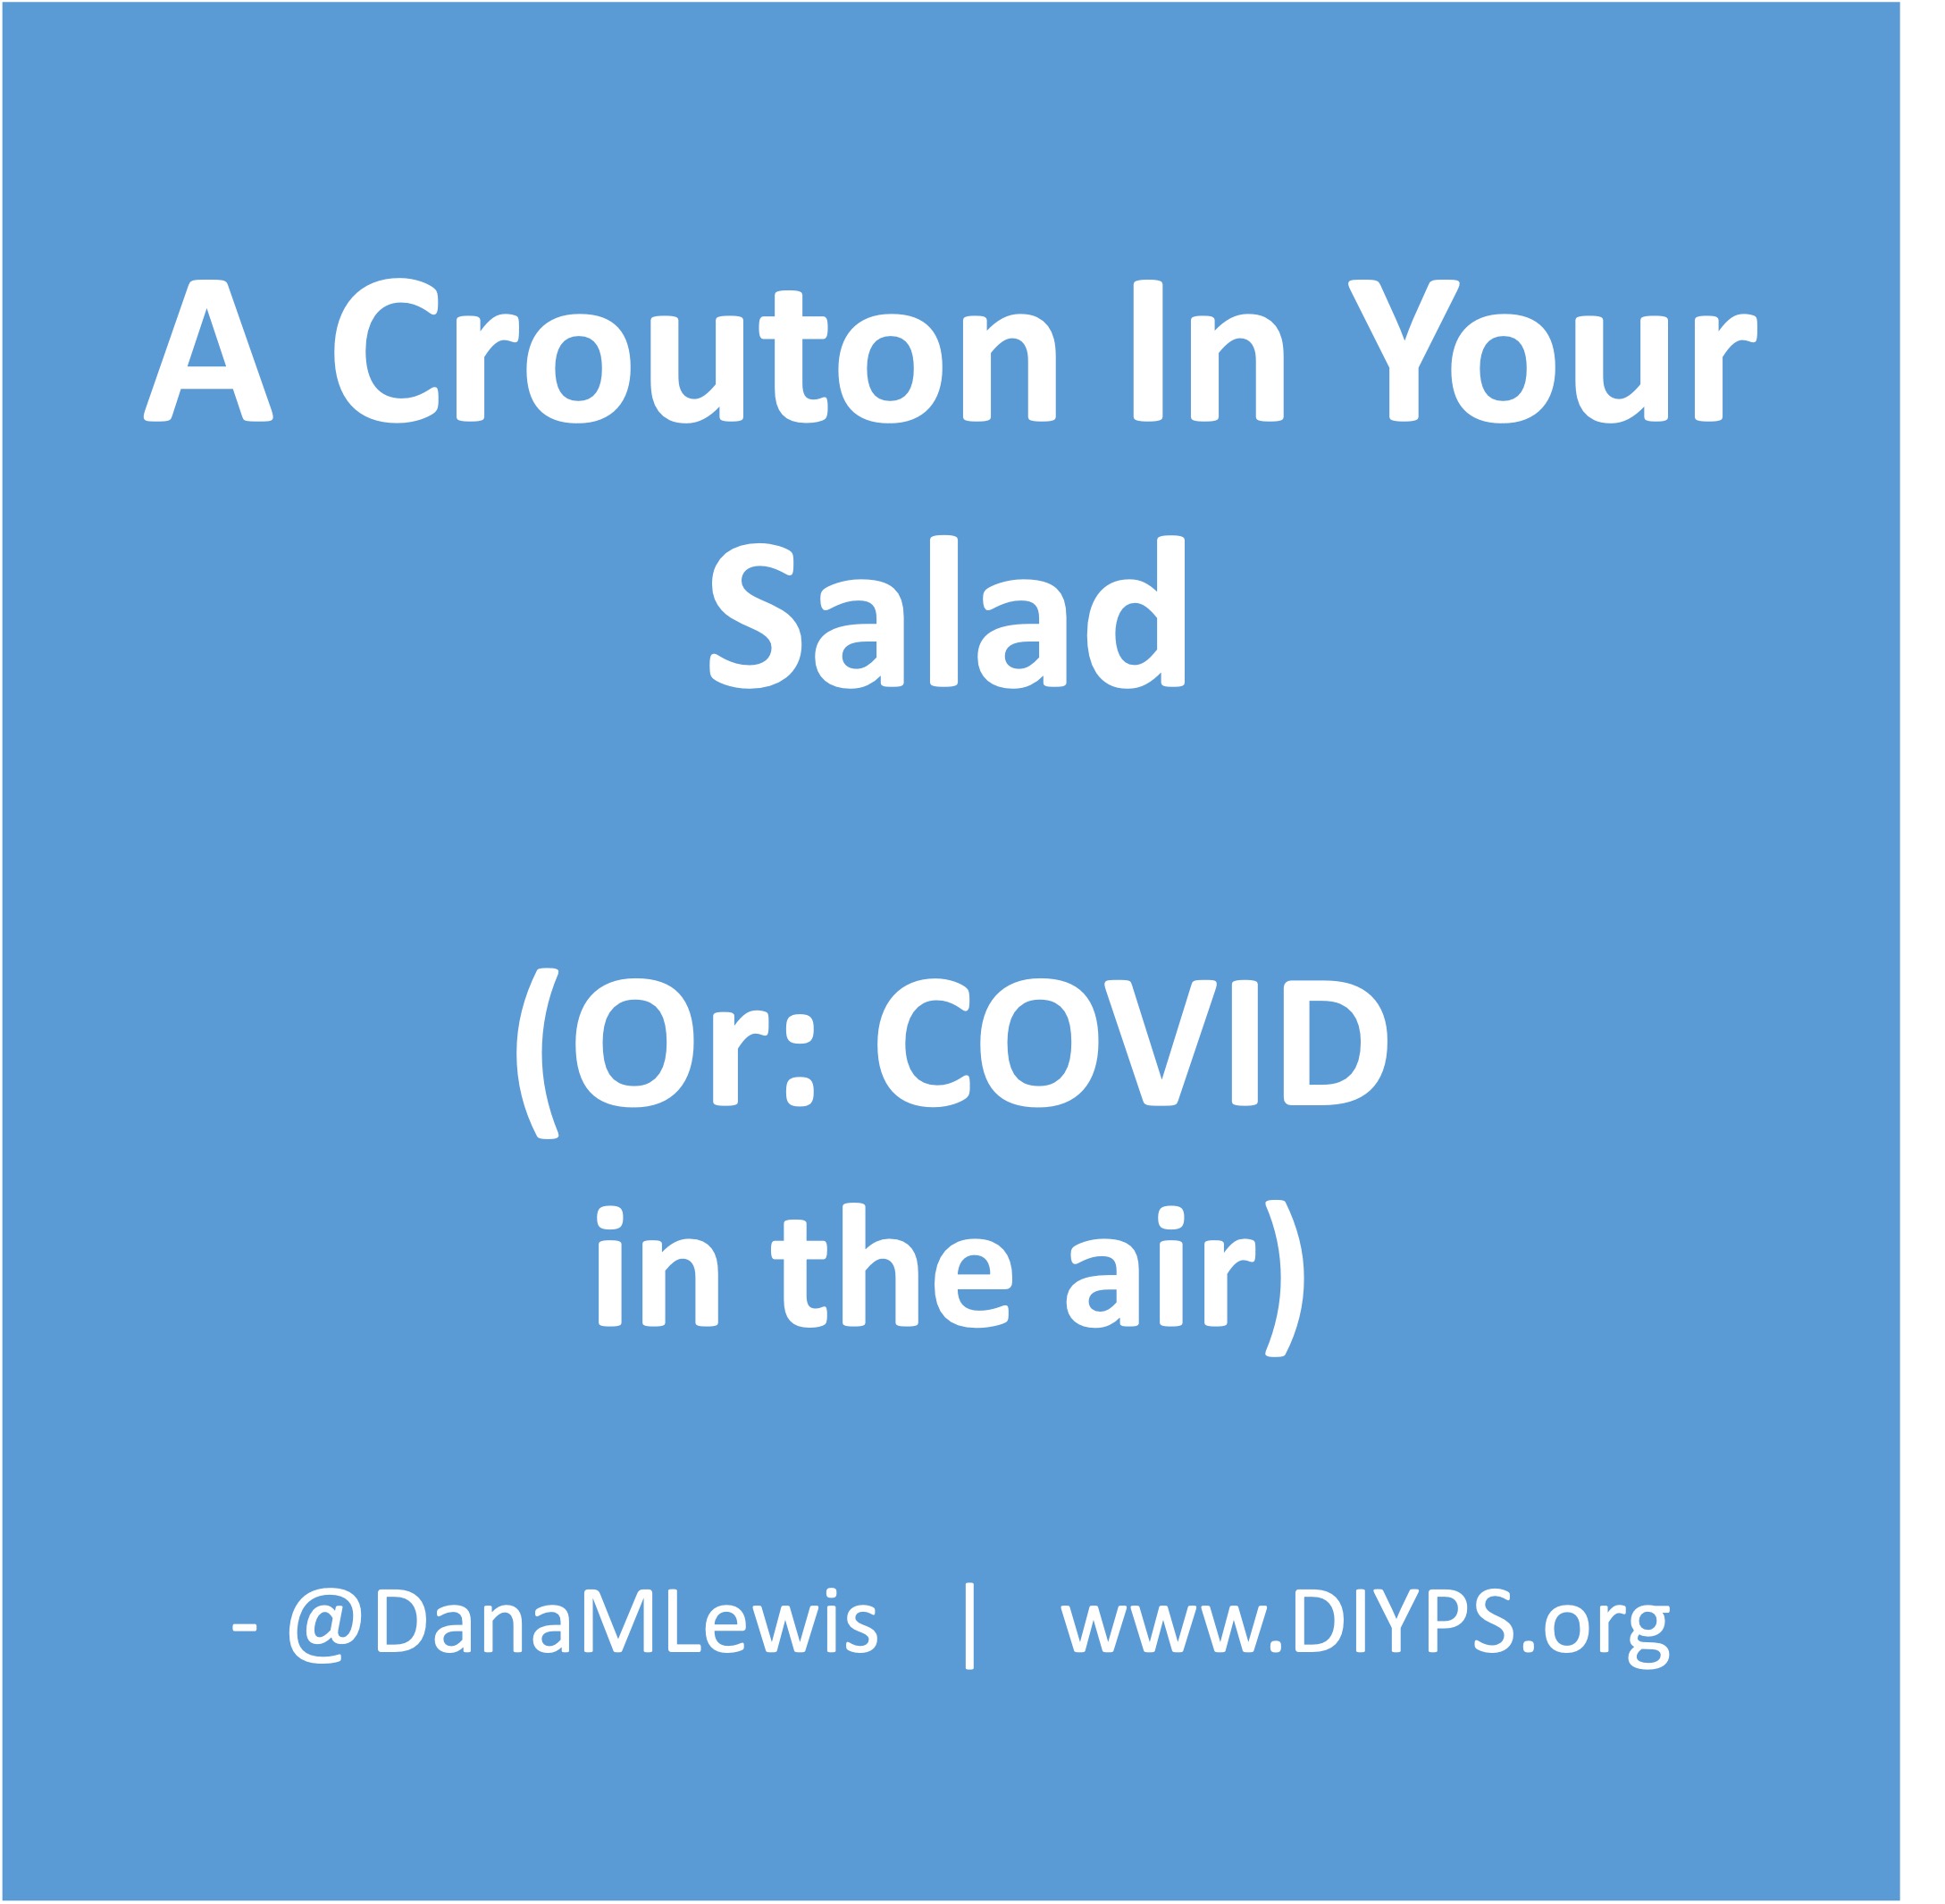 A Crouton In Your Salad (or COVID in the air) by Dana M. Lewis on DIYPS.org